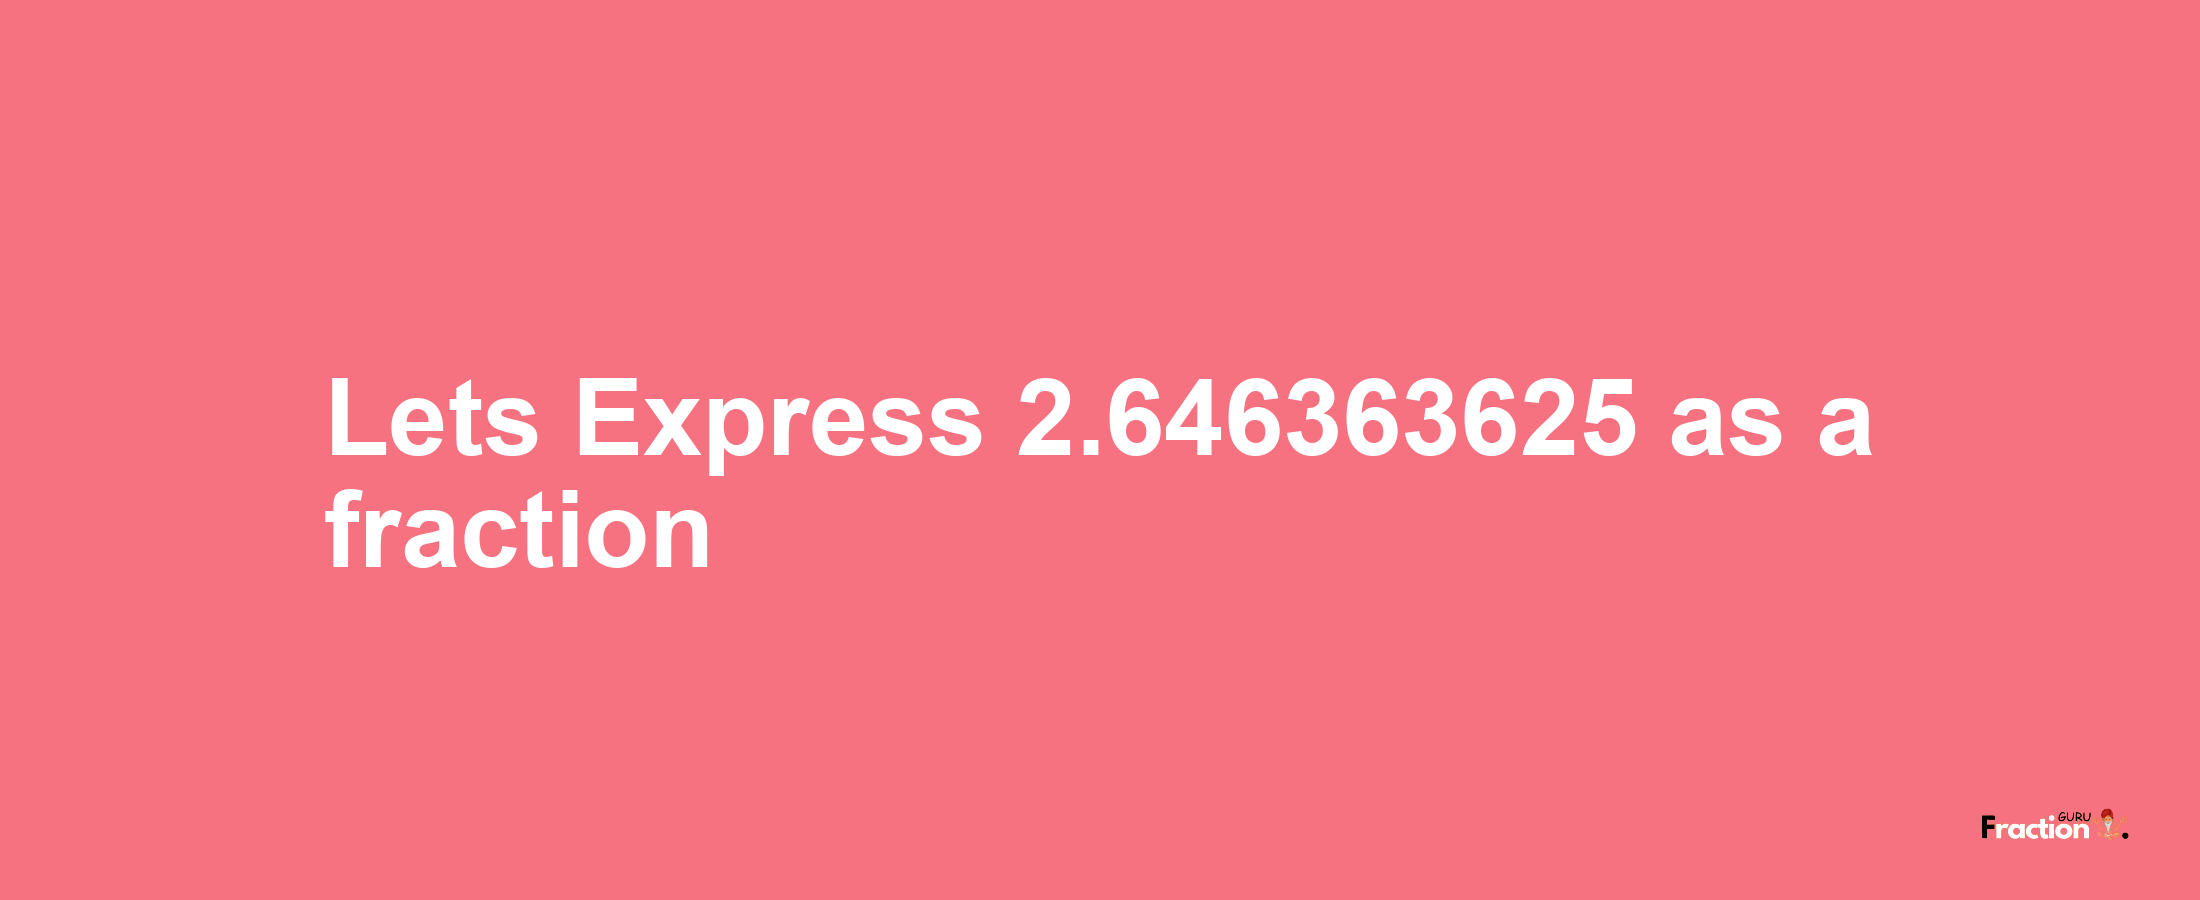 Lets Express 2.646363625 as afraction